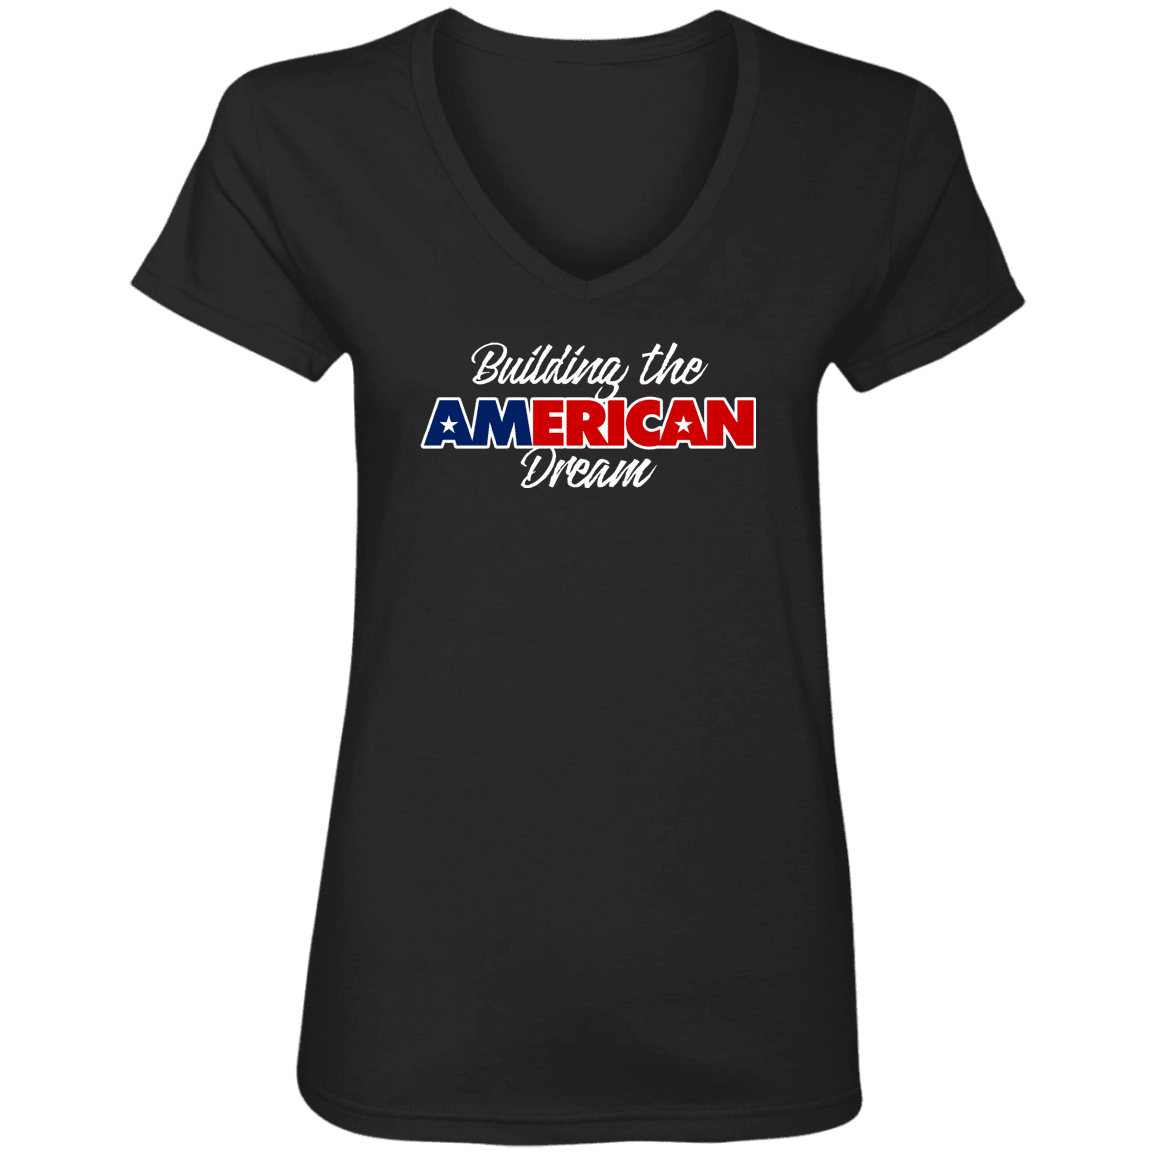 Designs by MyUtopia Shout Out:Building the American Dream Ladies' V-Neck T-Shirt,Black / S,Ladies T-Shirts